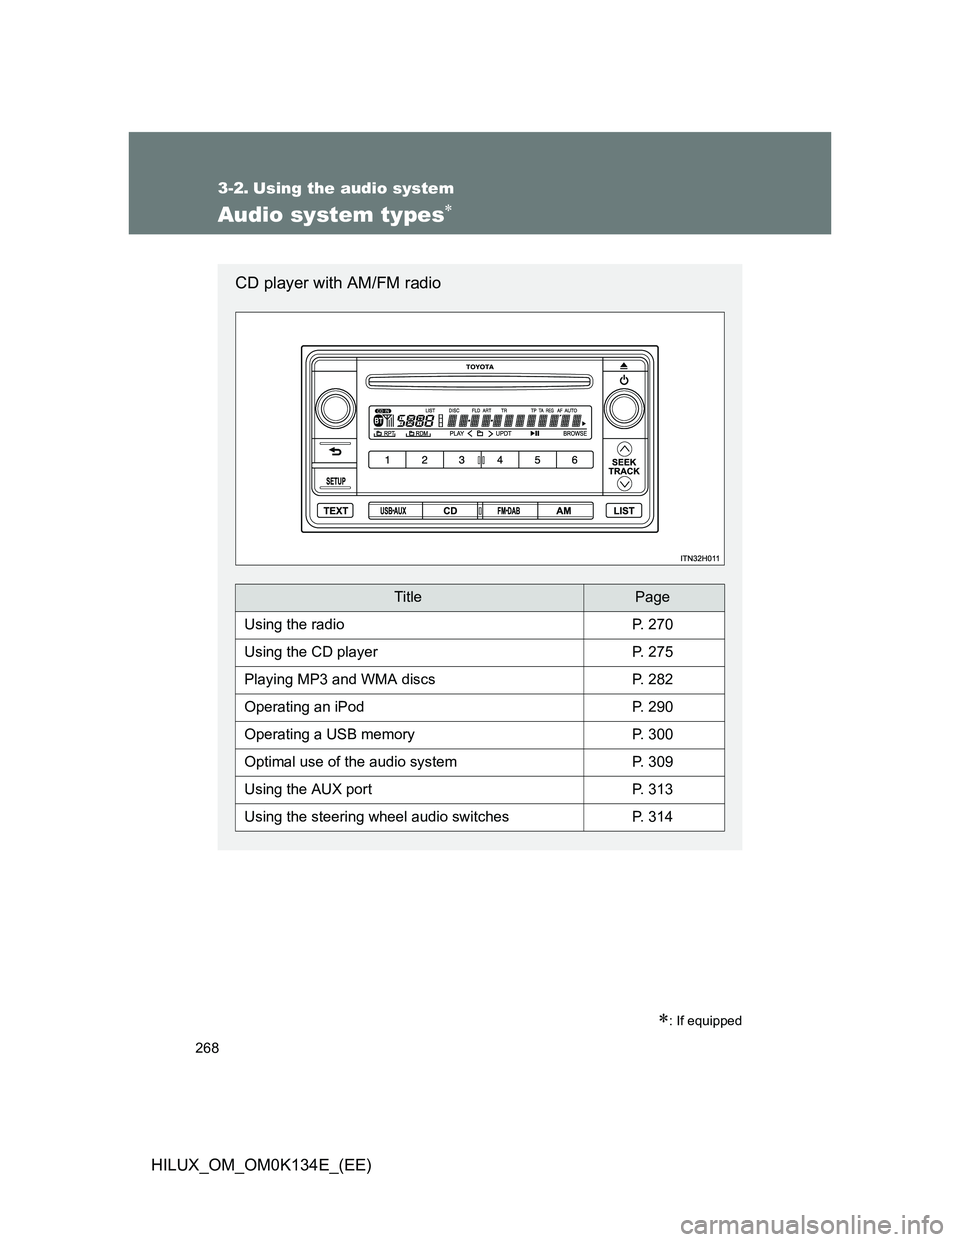 TOYOTA HILUX 2013  Owners Manual (in English) 268
HILUX_OM_OM0K134E_(EE)
3-2. Using the audio system
Audio system types
: If equipped
CD player with AM/FM radio
TitlePage
Using the radioP. 270
Using the CD playerP. 275
Playing MP3 and WMA d